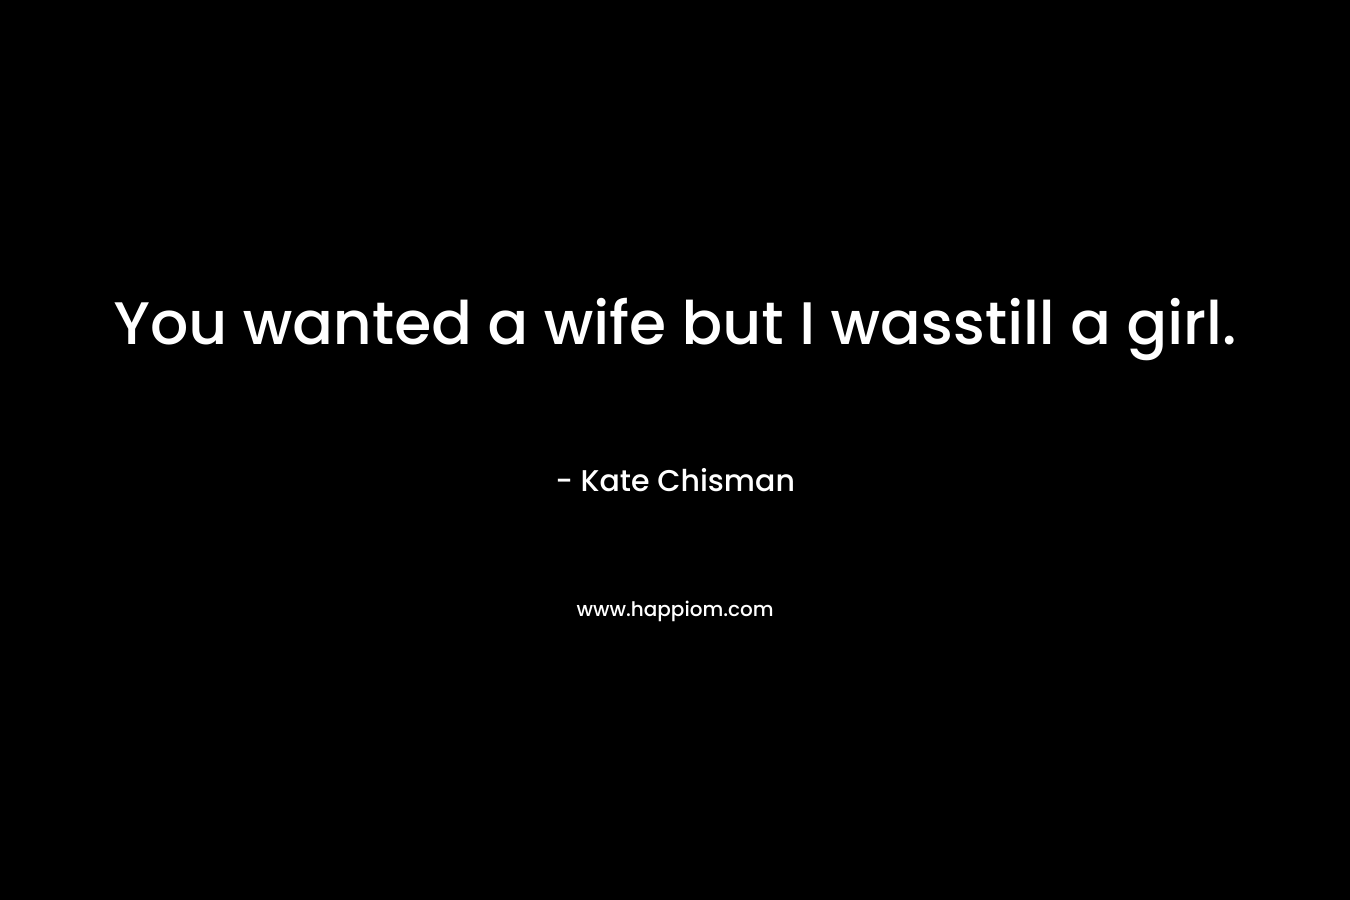 You wanted a wife but I wasstill a girl. – Kate Chisman